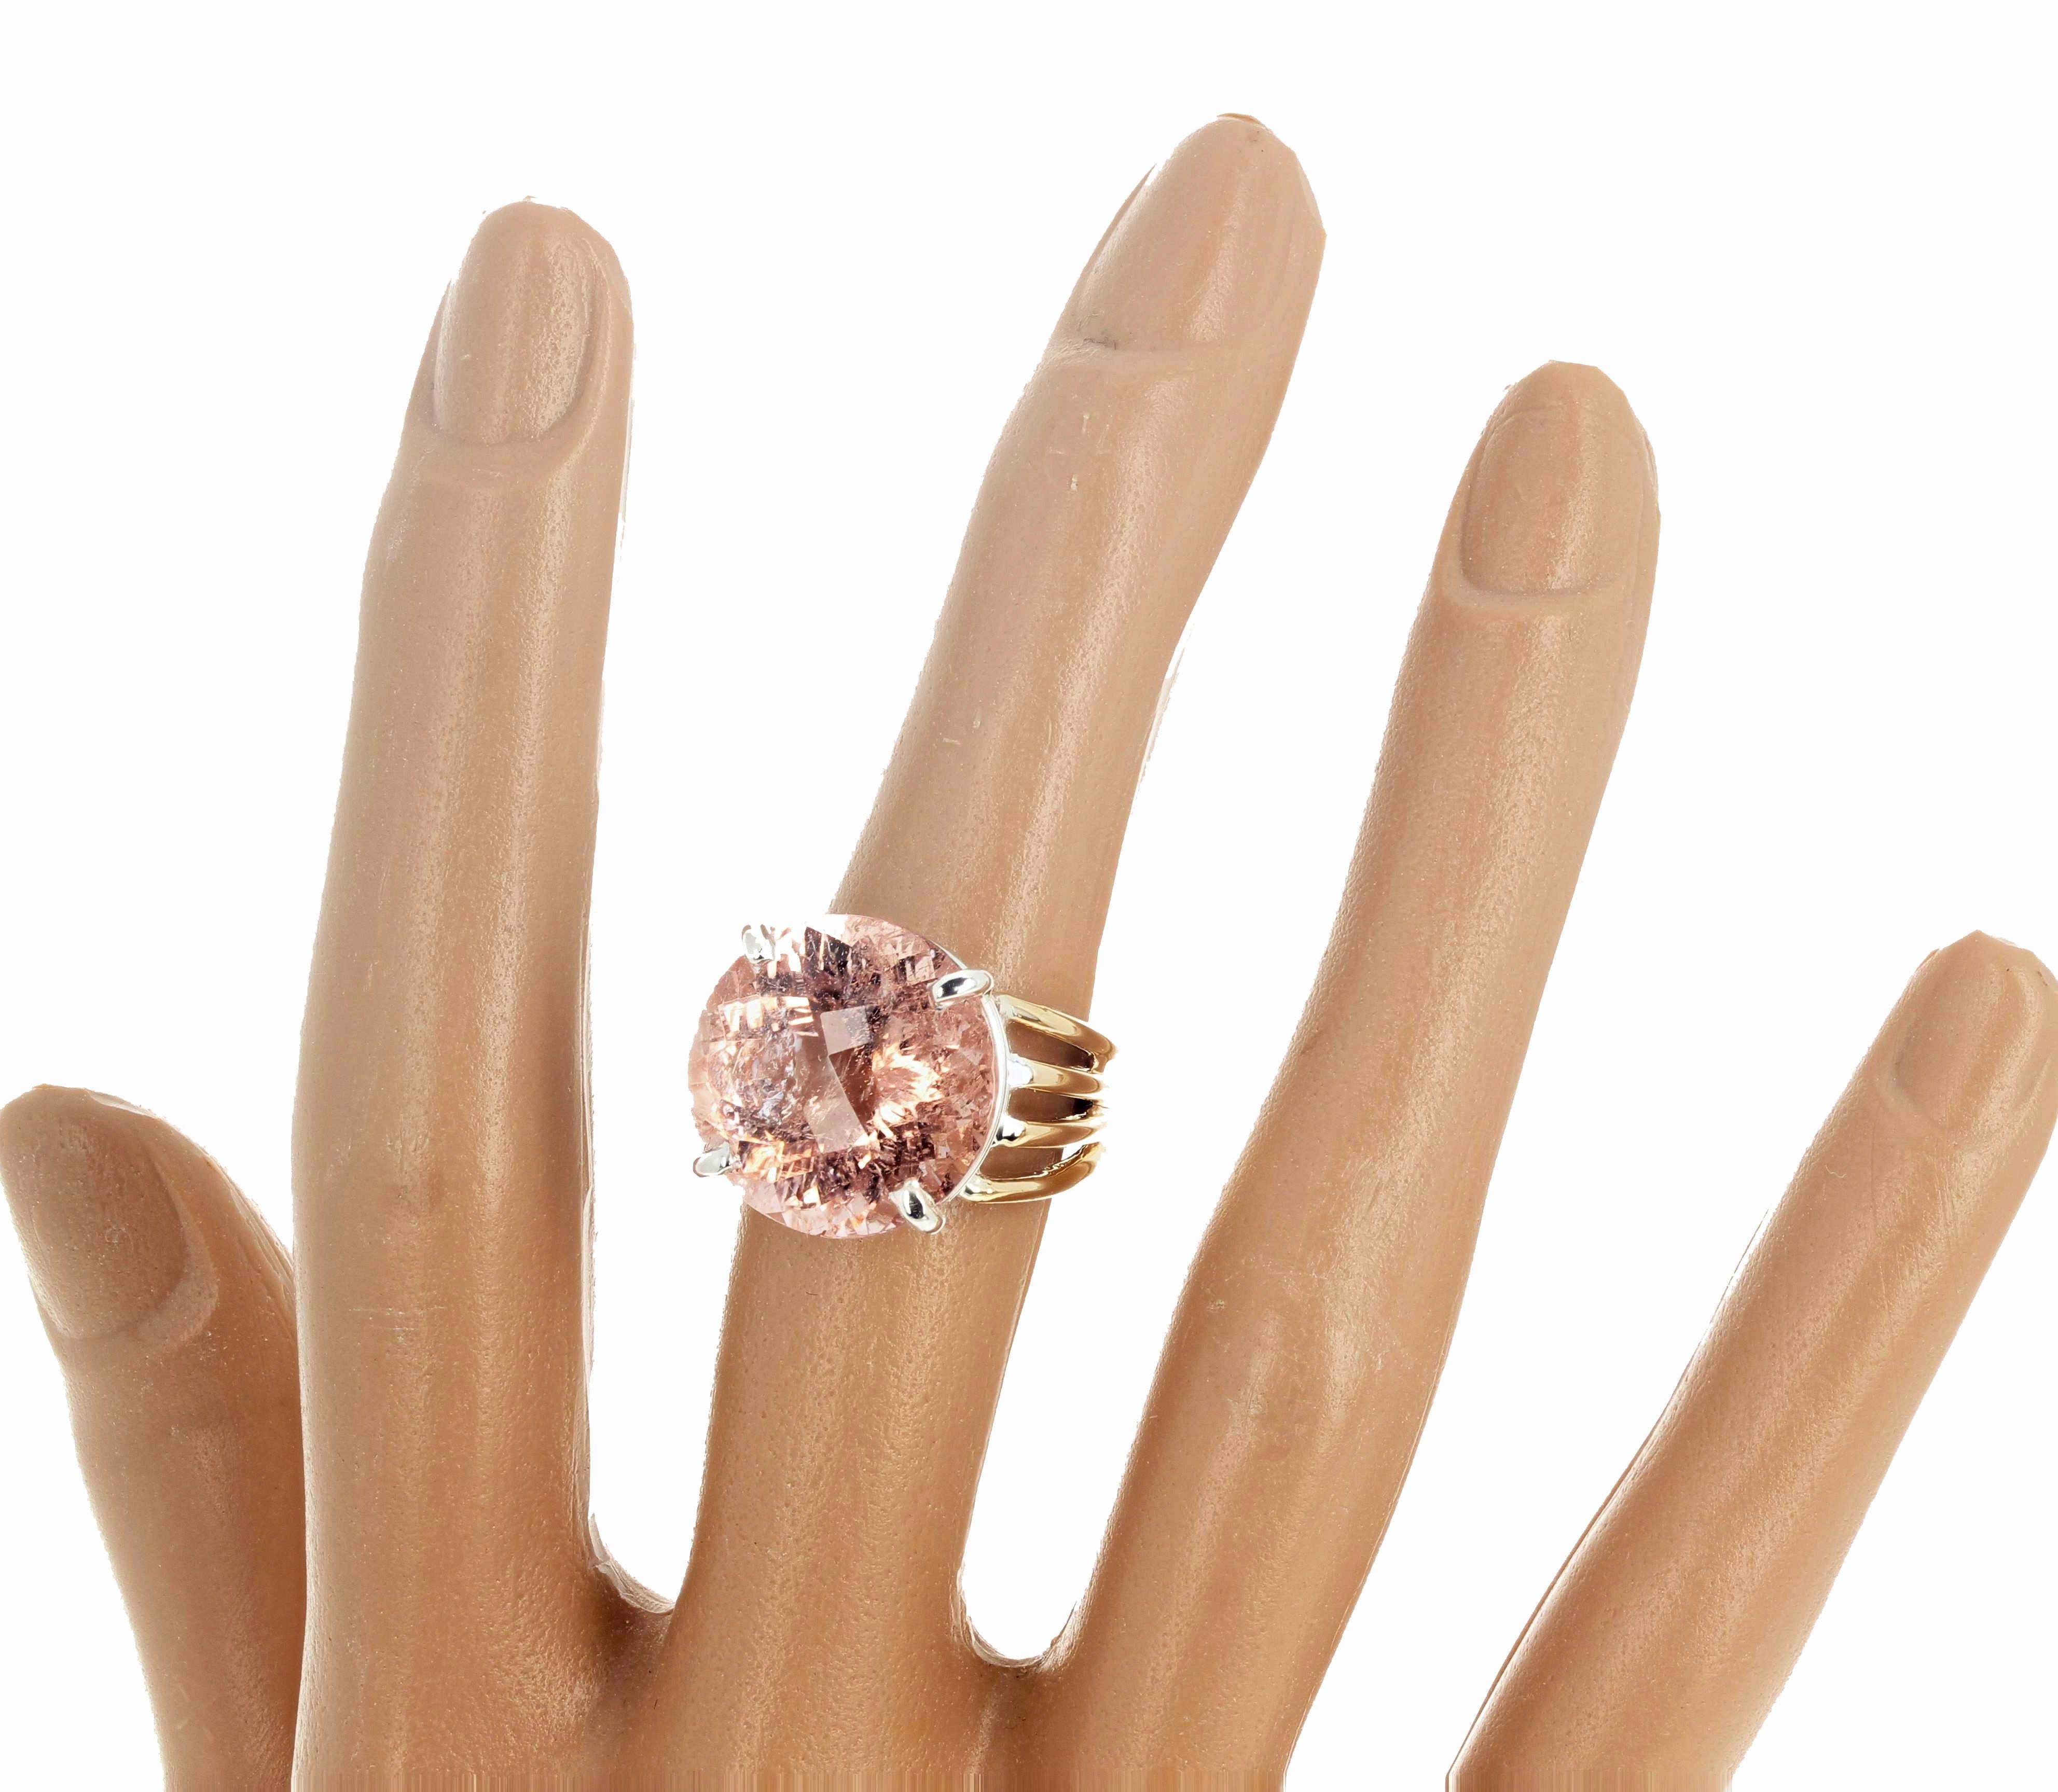 Gorgeous intensely glittering 14.1 carat natural pink Morganite is 16mm and is set in a 14Kt yellow gold ring with sterling silver prongs.    It glitters so brightly that it is difficult to see the natural inclusions.  The ring is a size 7 (sizable